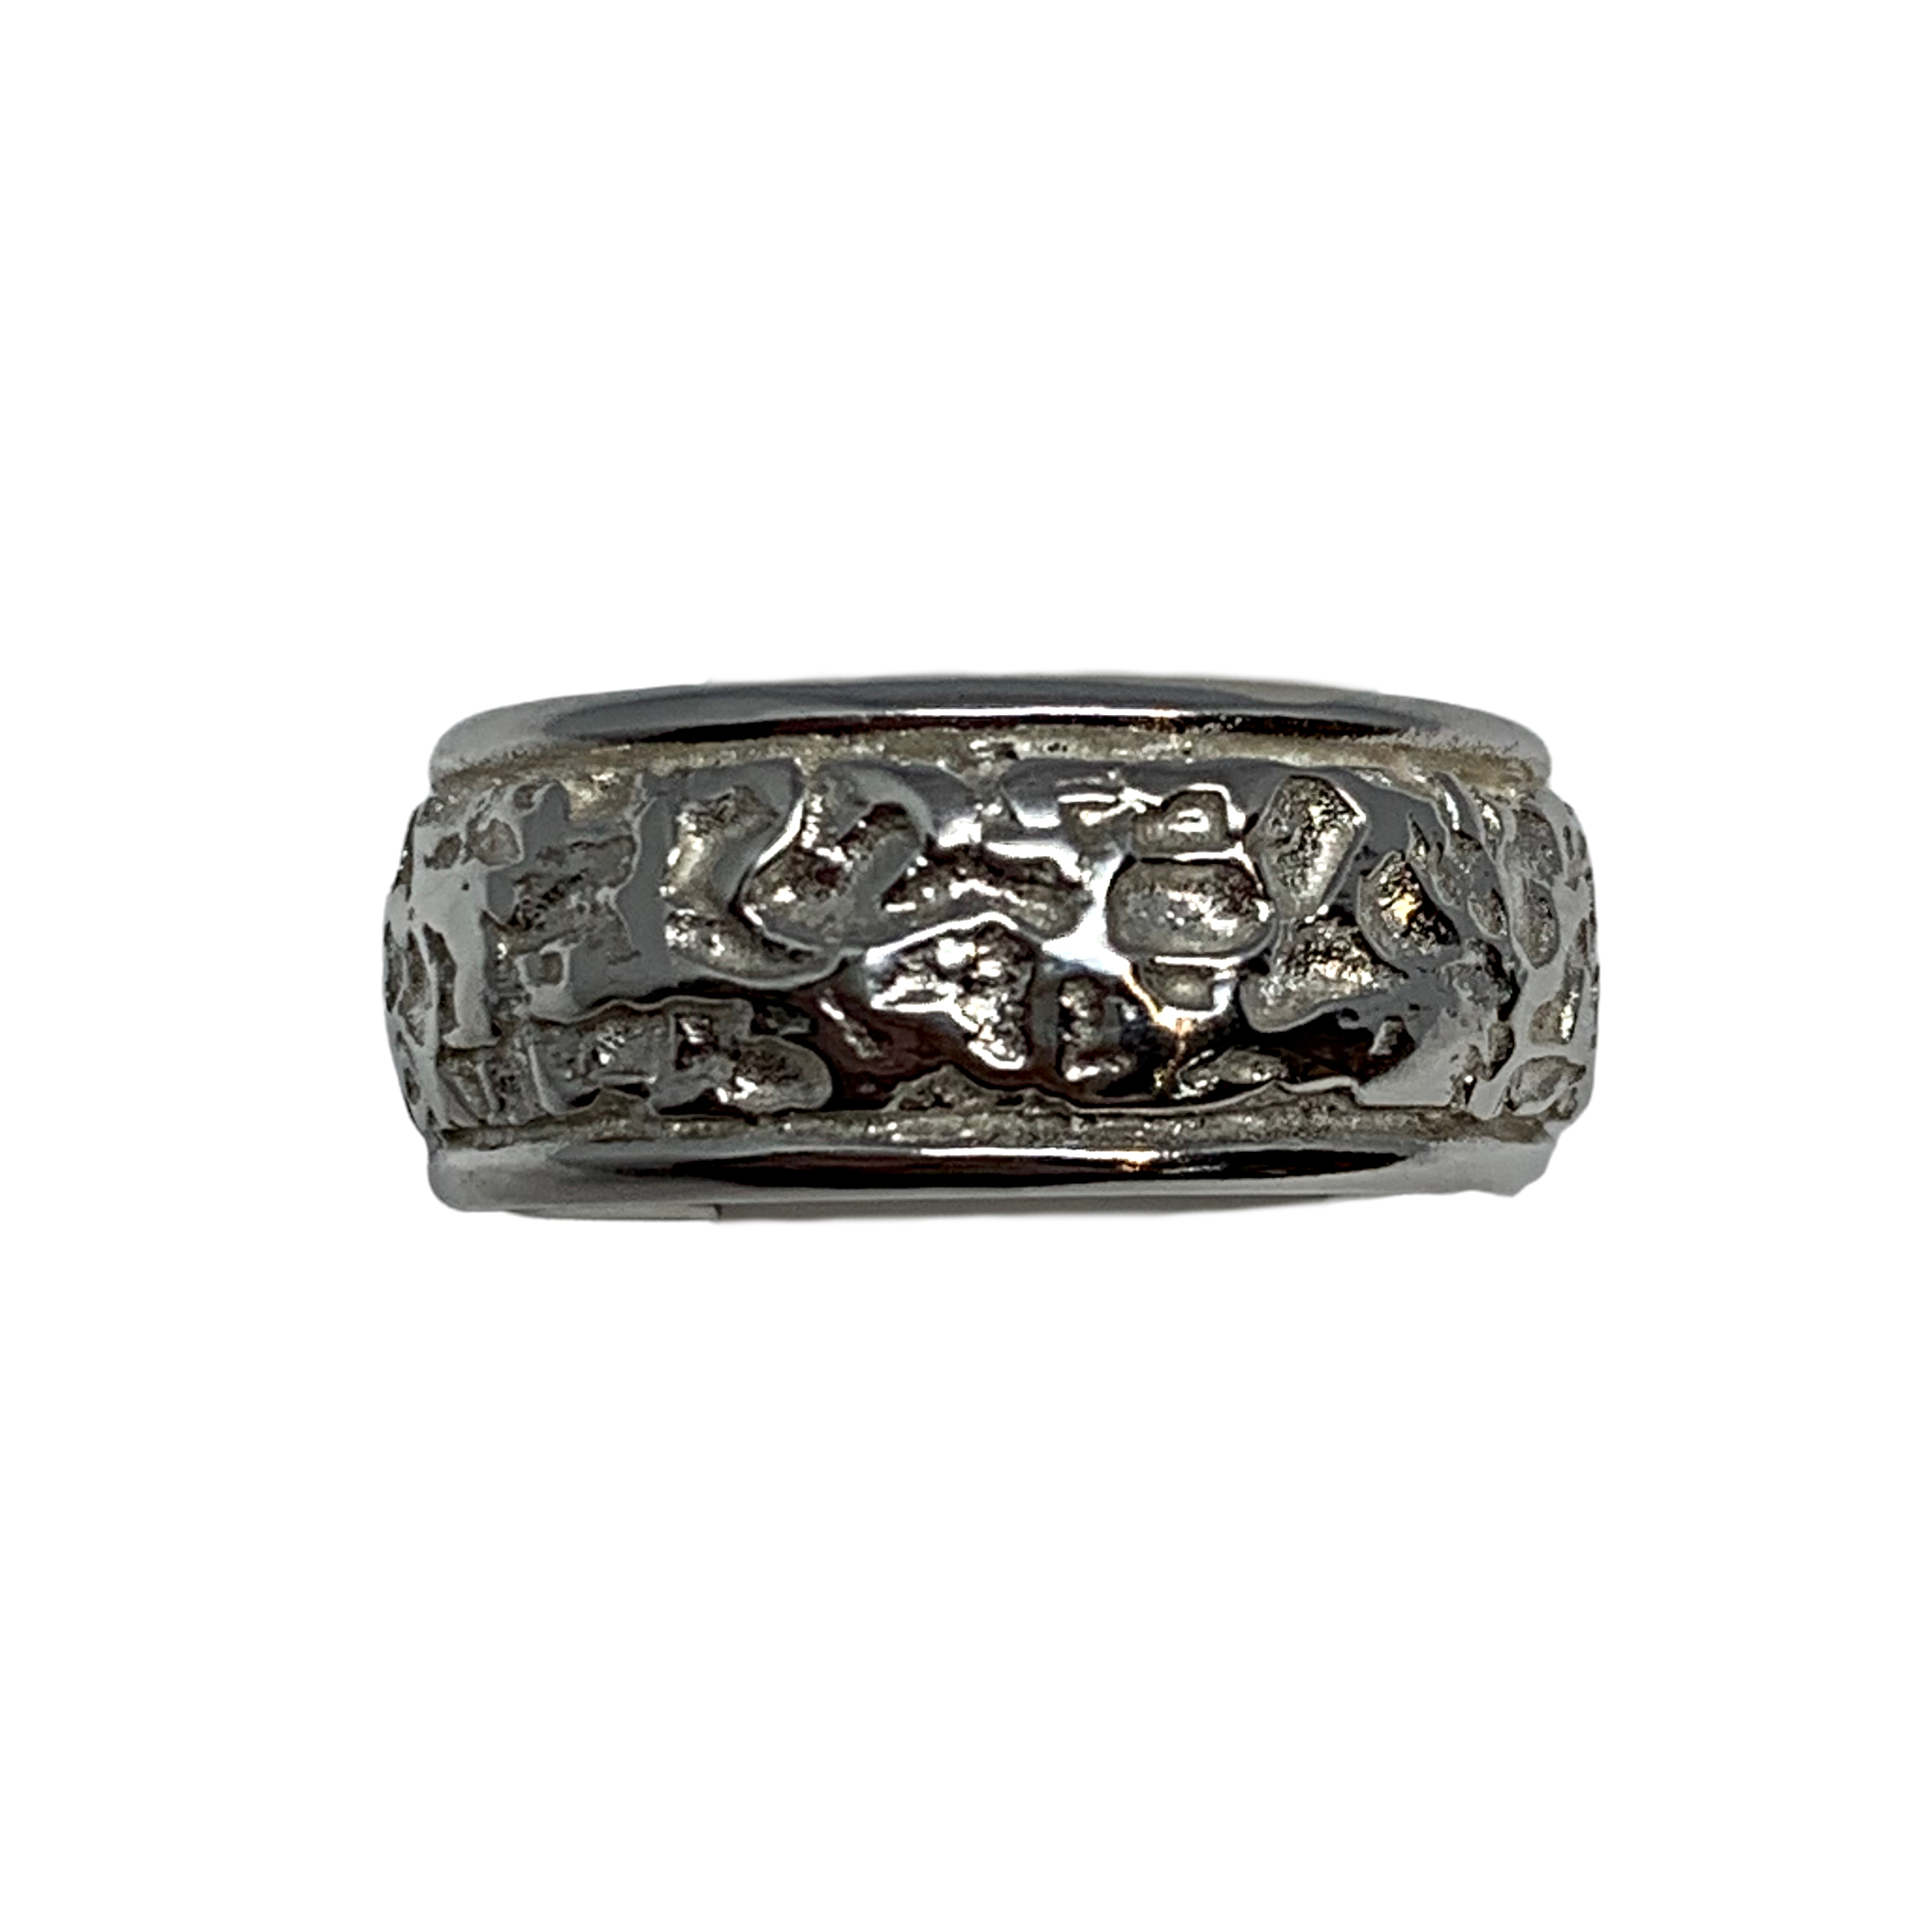 Handmade silver ring by A&R Jewellery | Effusion Art Gallery + Cast Glass Studio, Invermere BC